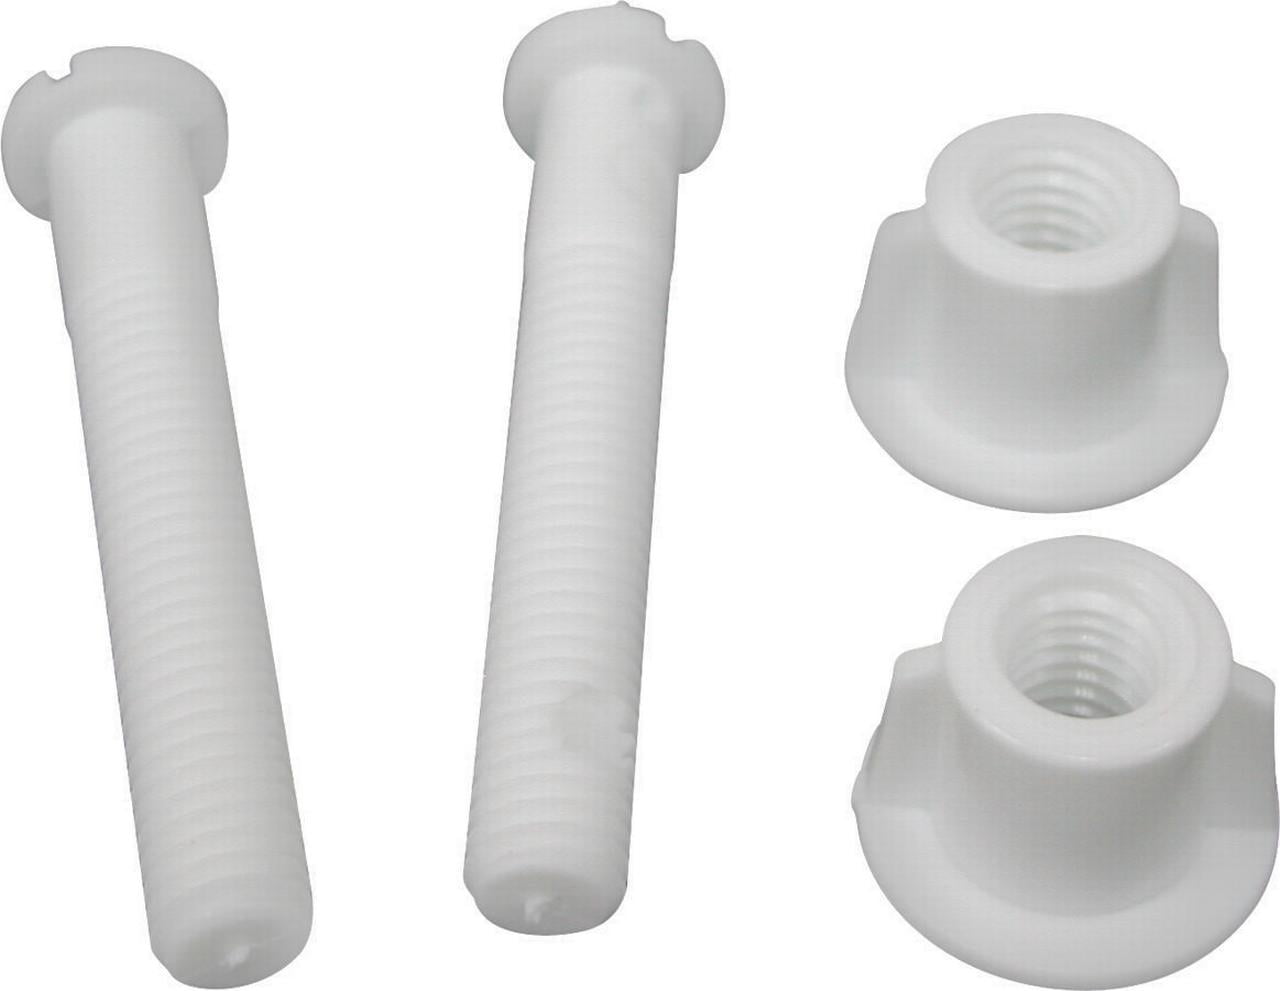 2 Packs of 2 Ace 45438 Toilet Seat Hinge Screw and Nut Set-3/8 in x 2 1/4" 